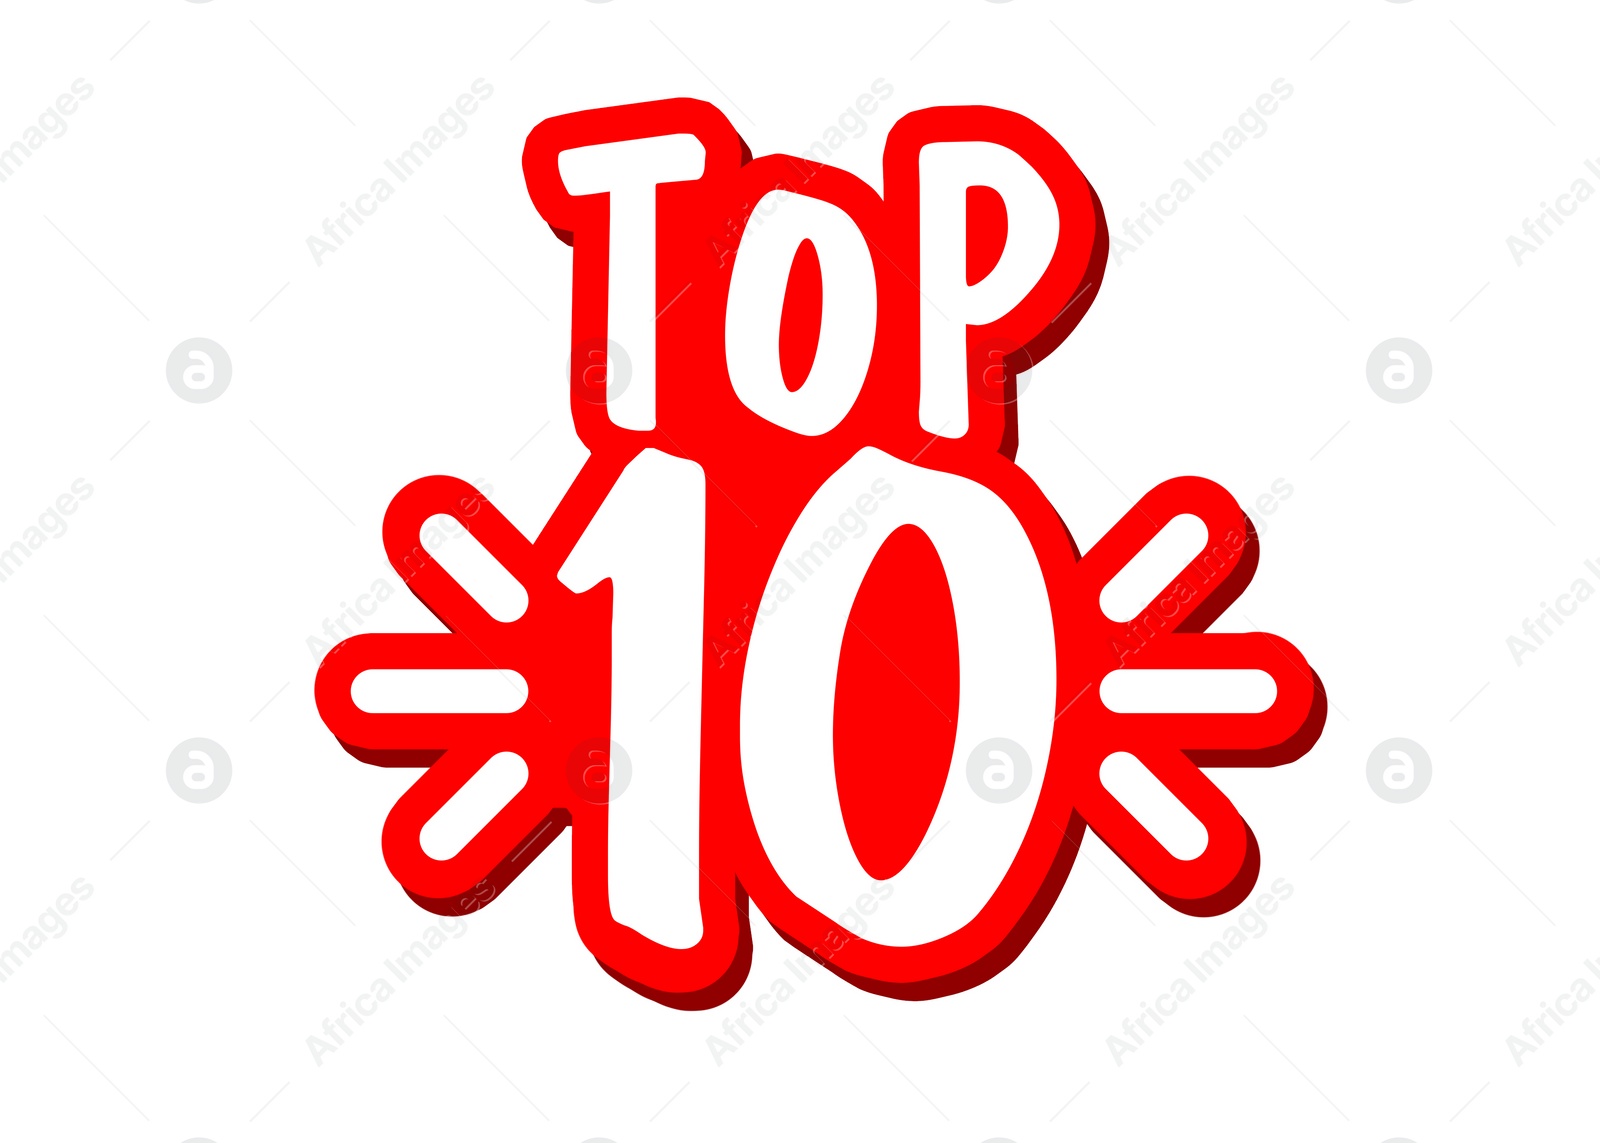 Illustration of Top ten list. Red word and number 10 on white background